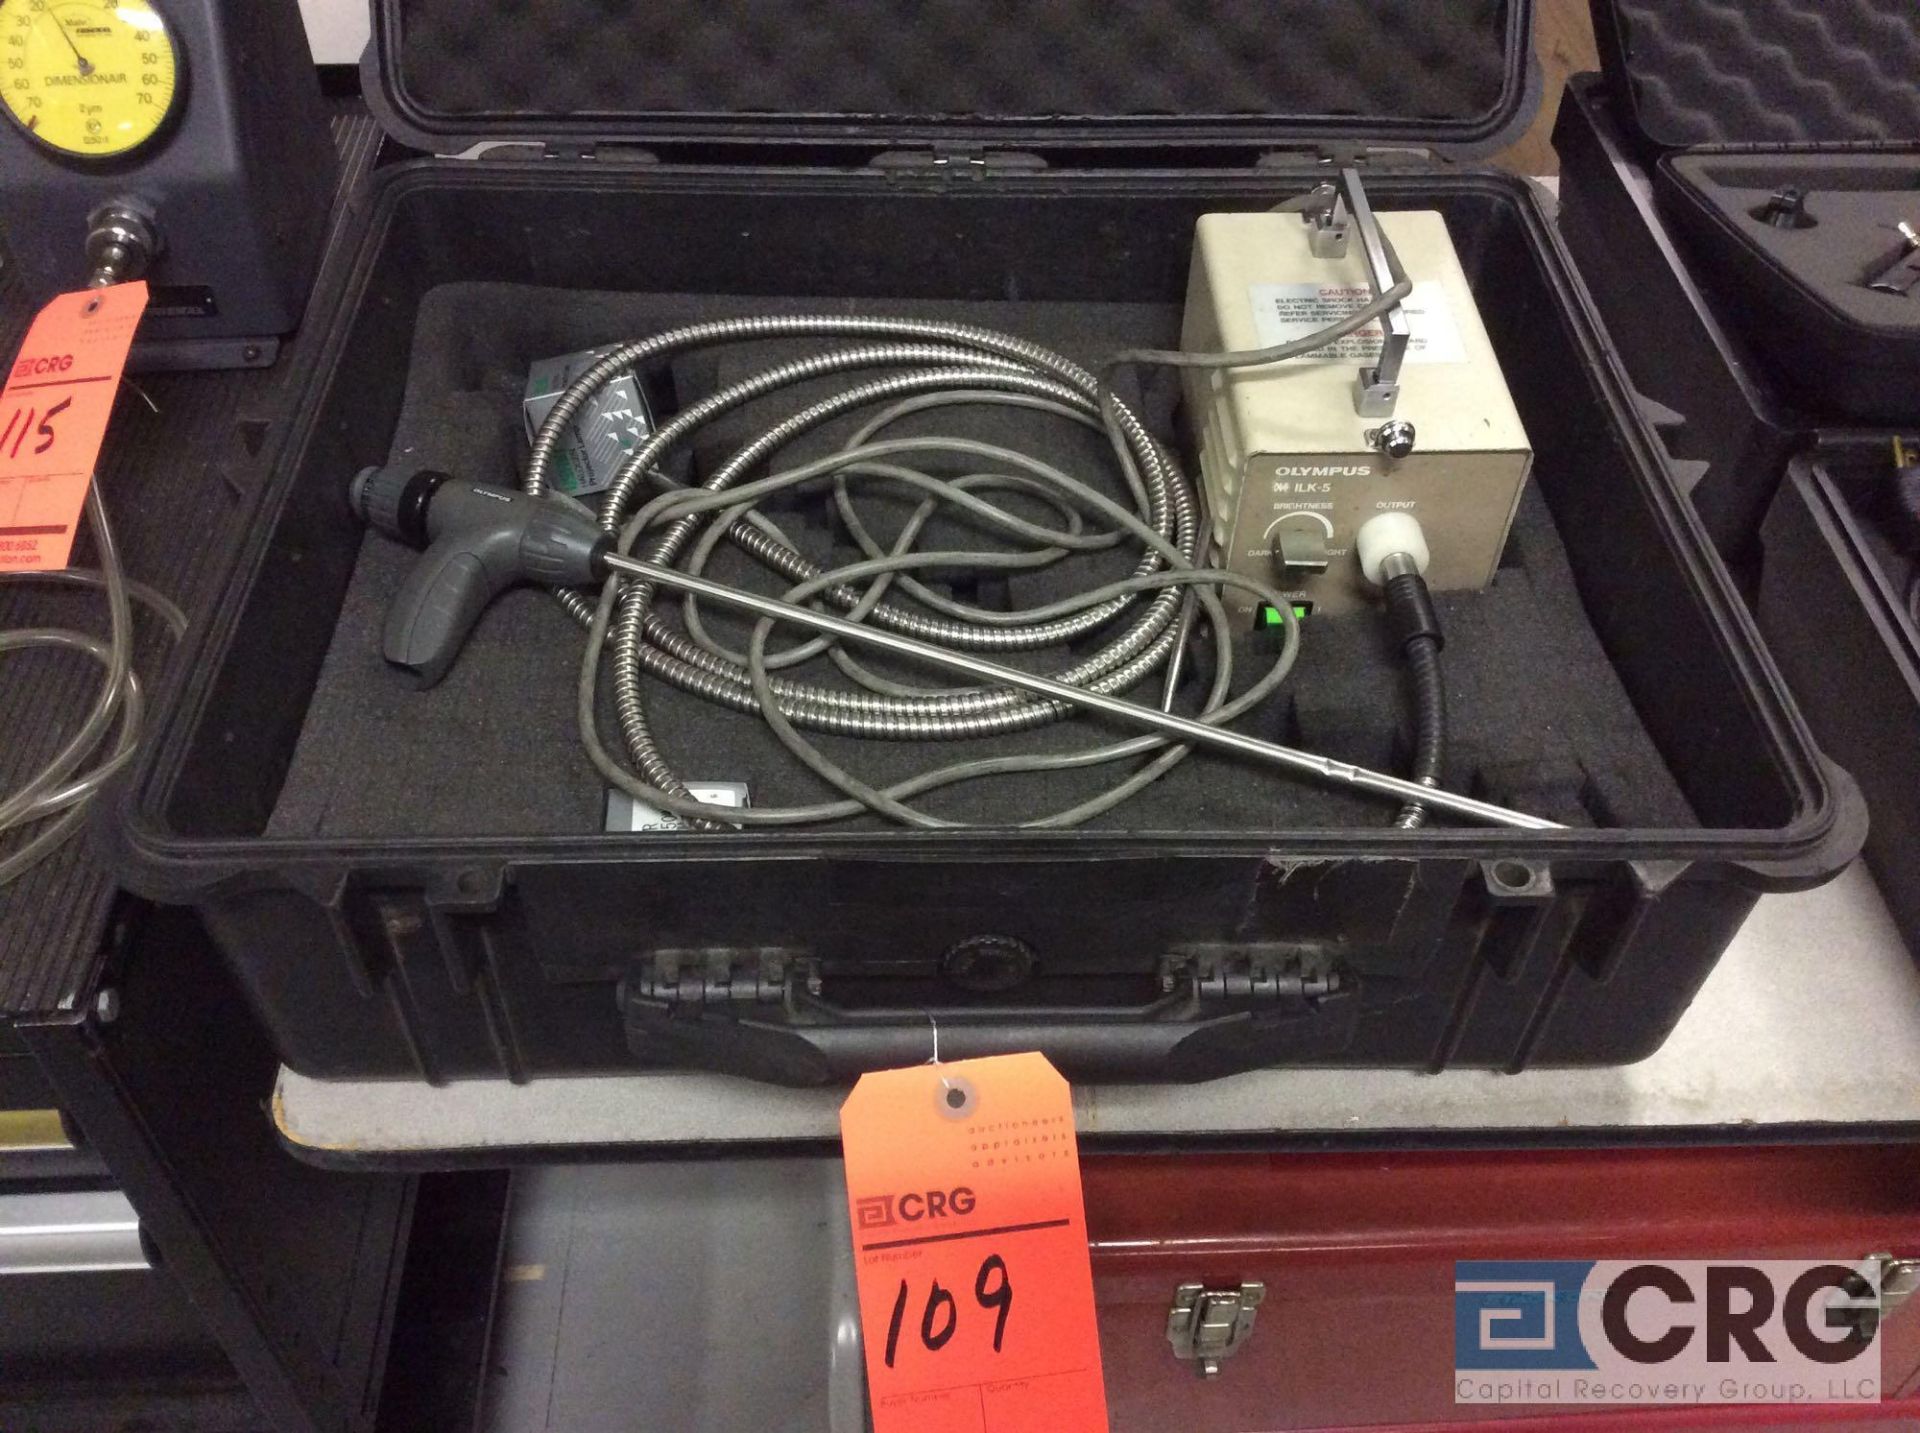 Olympus bore scope with Olympus ILK-5 light source and case